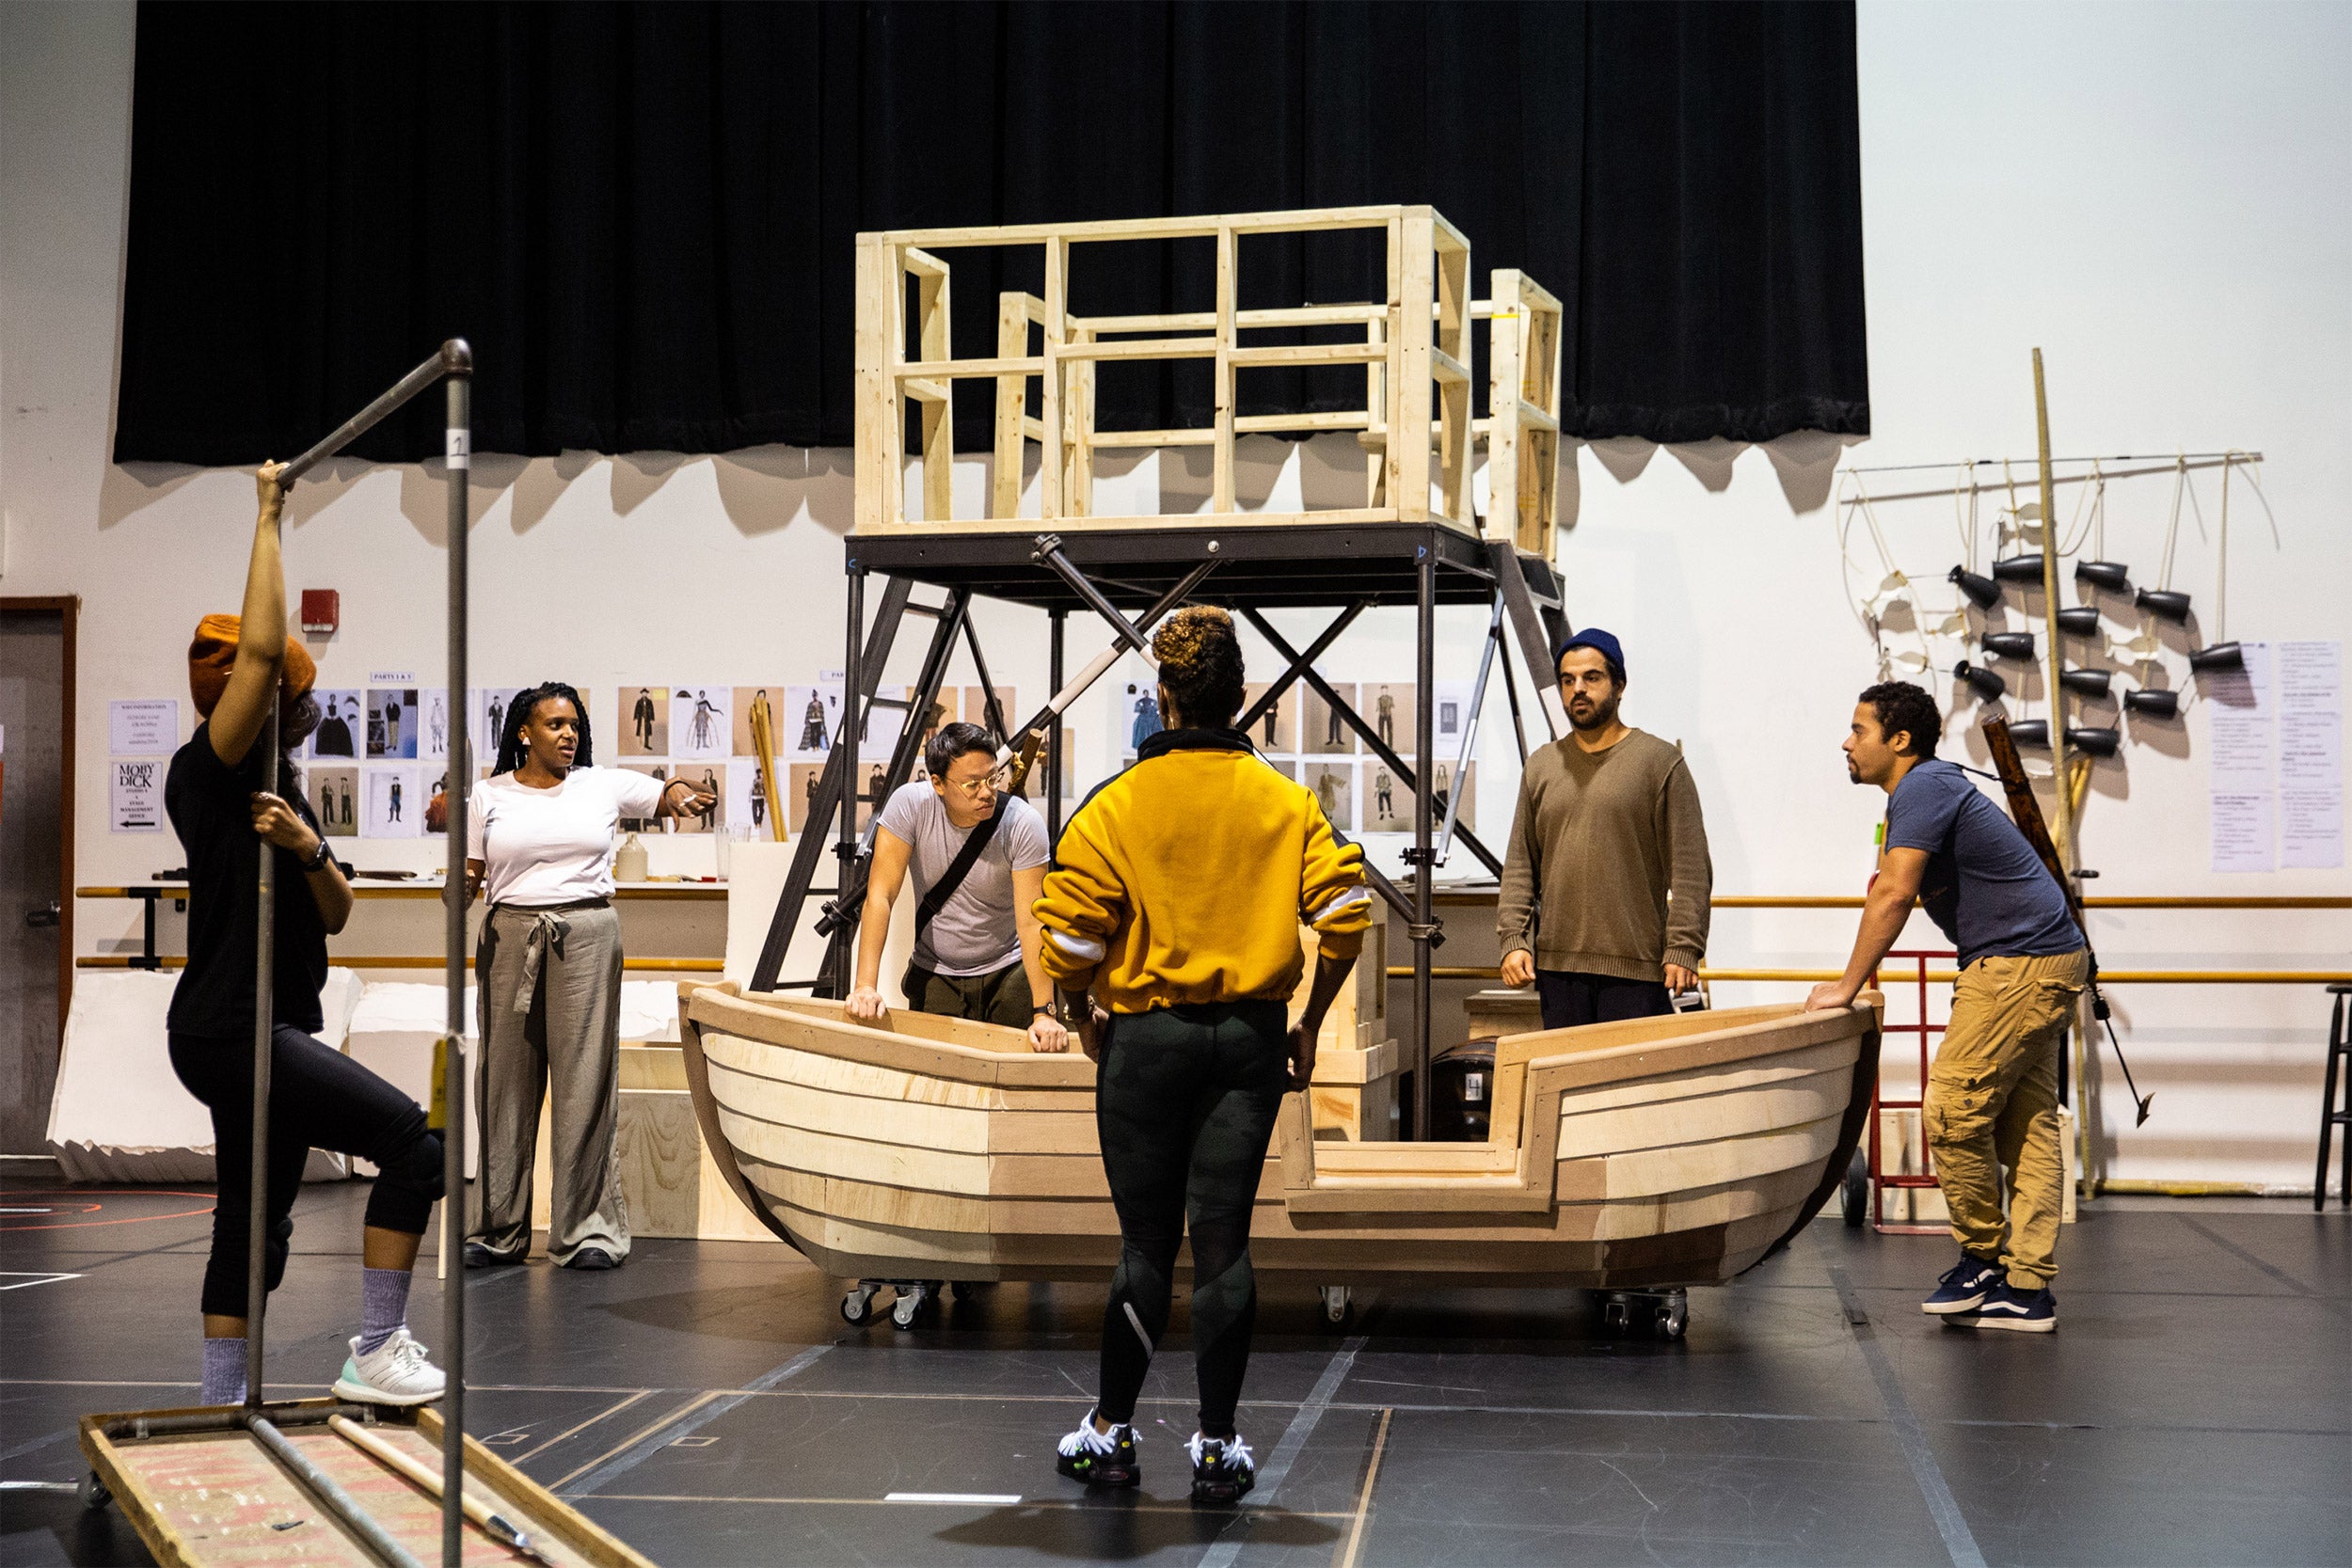 Cast members stand around a wooden prop boat as a choreographer looks on in the center.